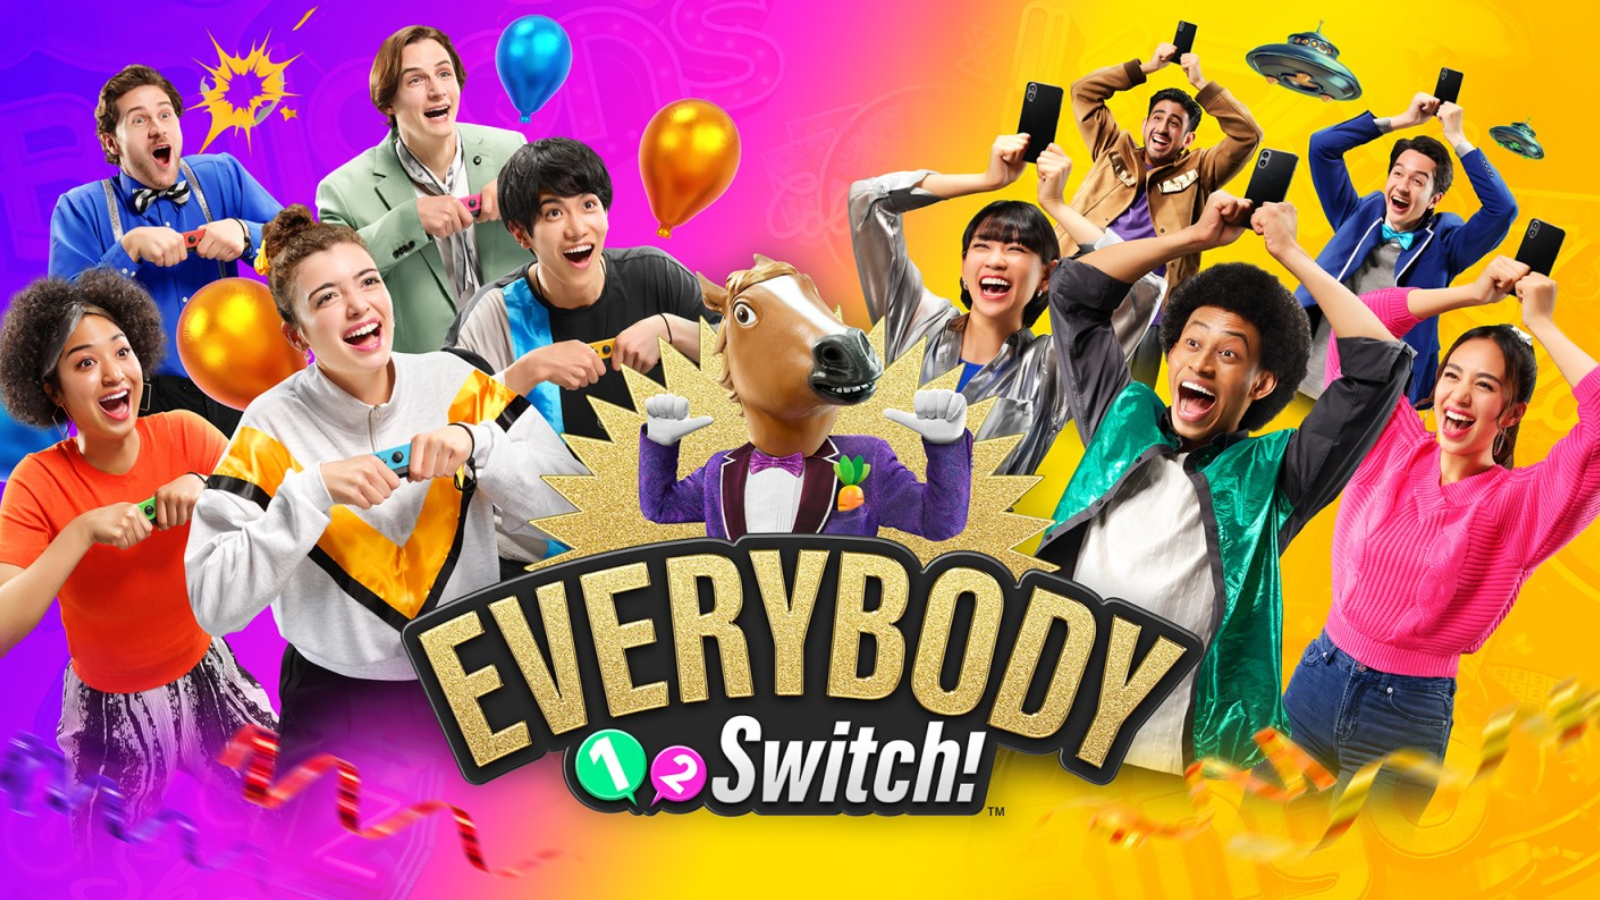 Everybody 1-2-Switch! debut trailer, details, and screenshots